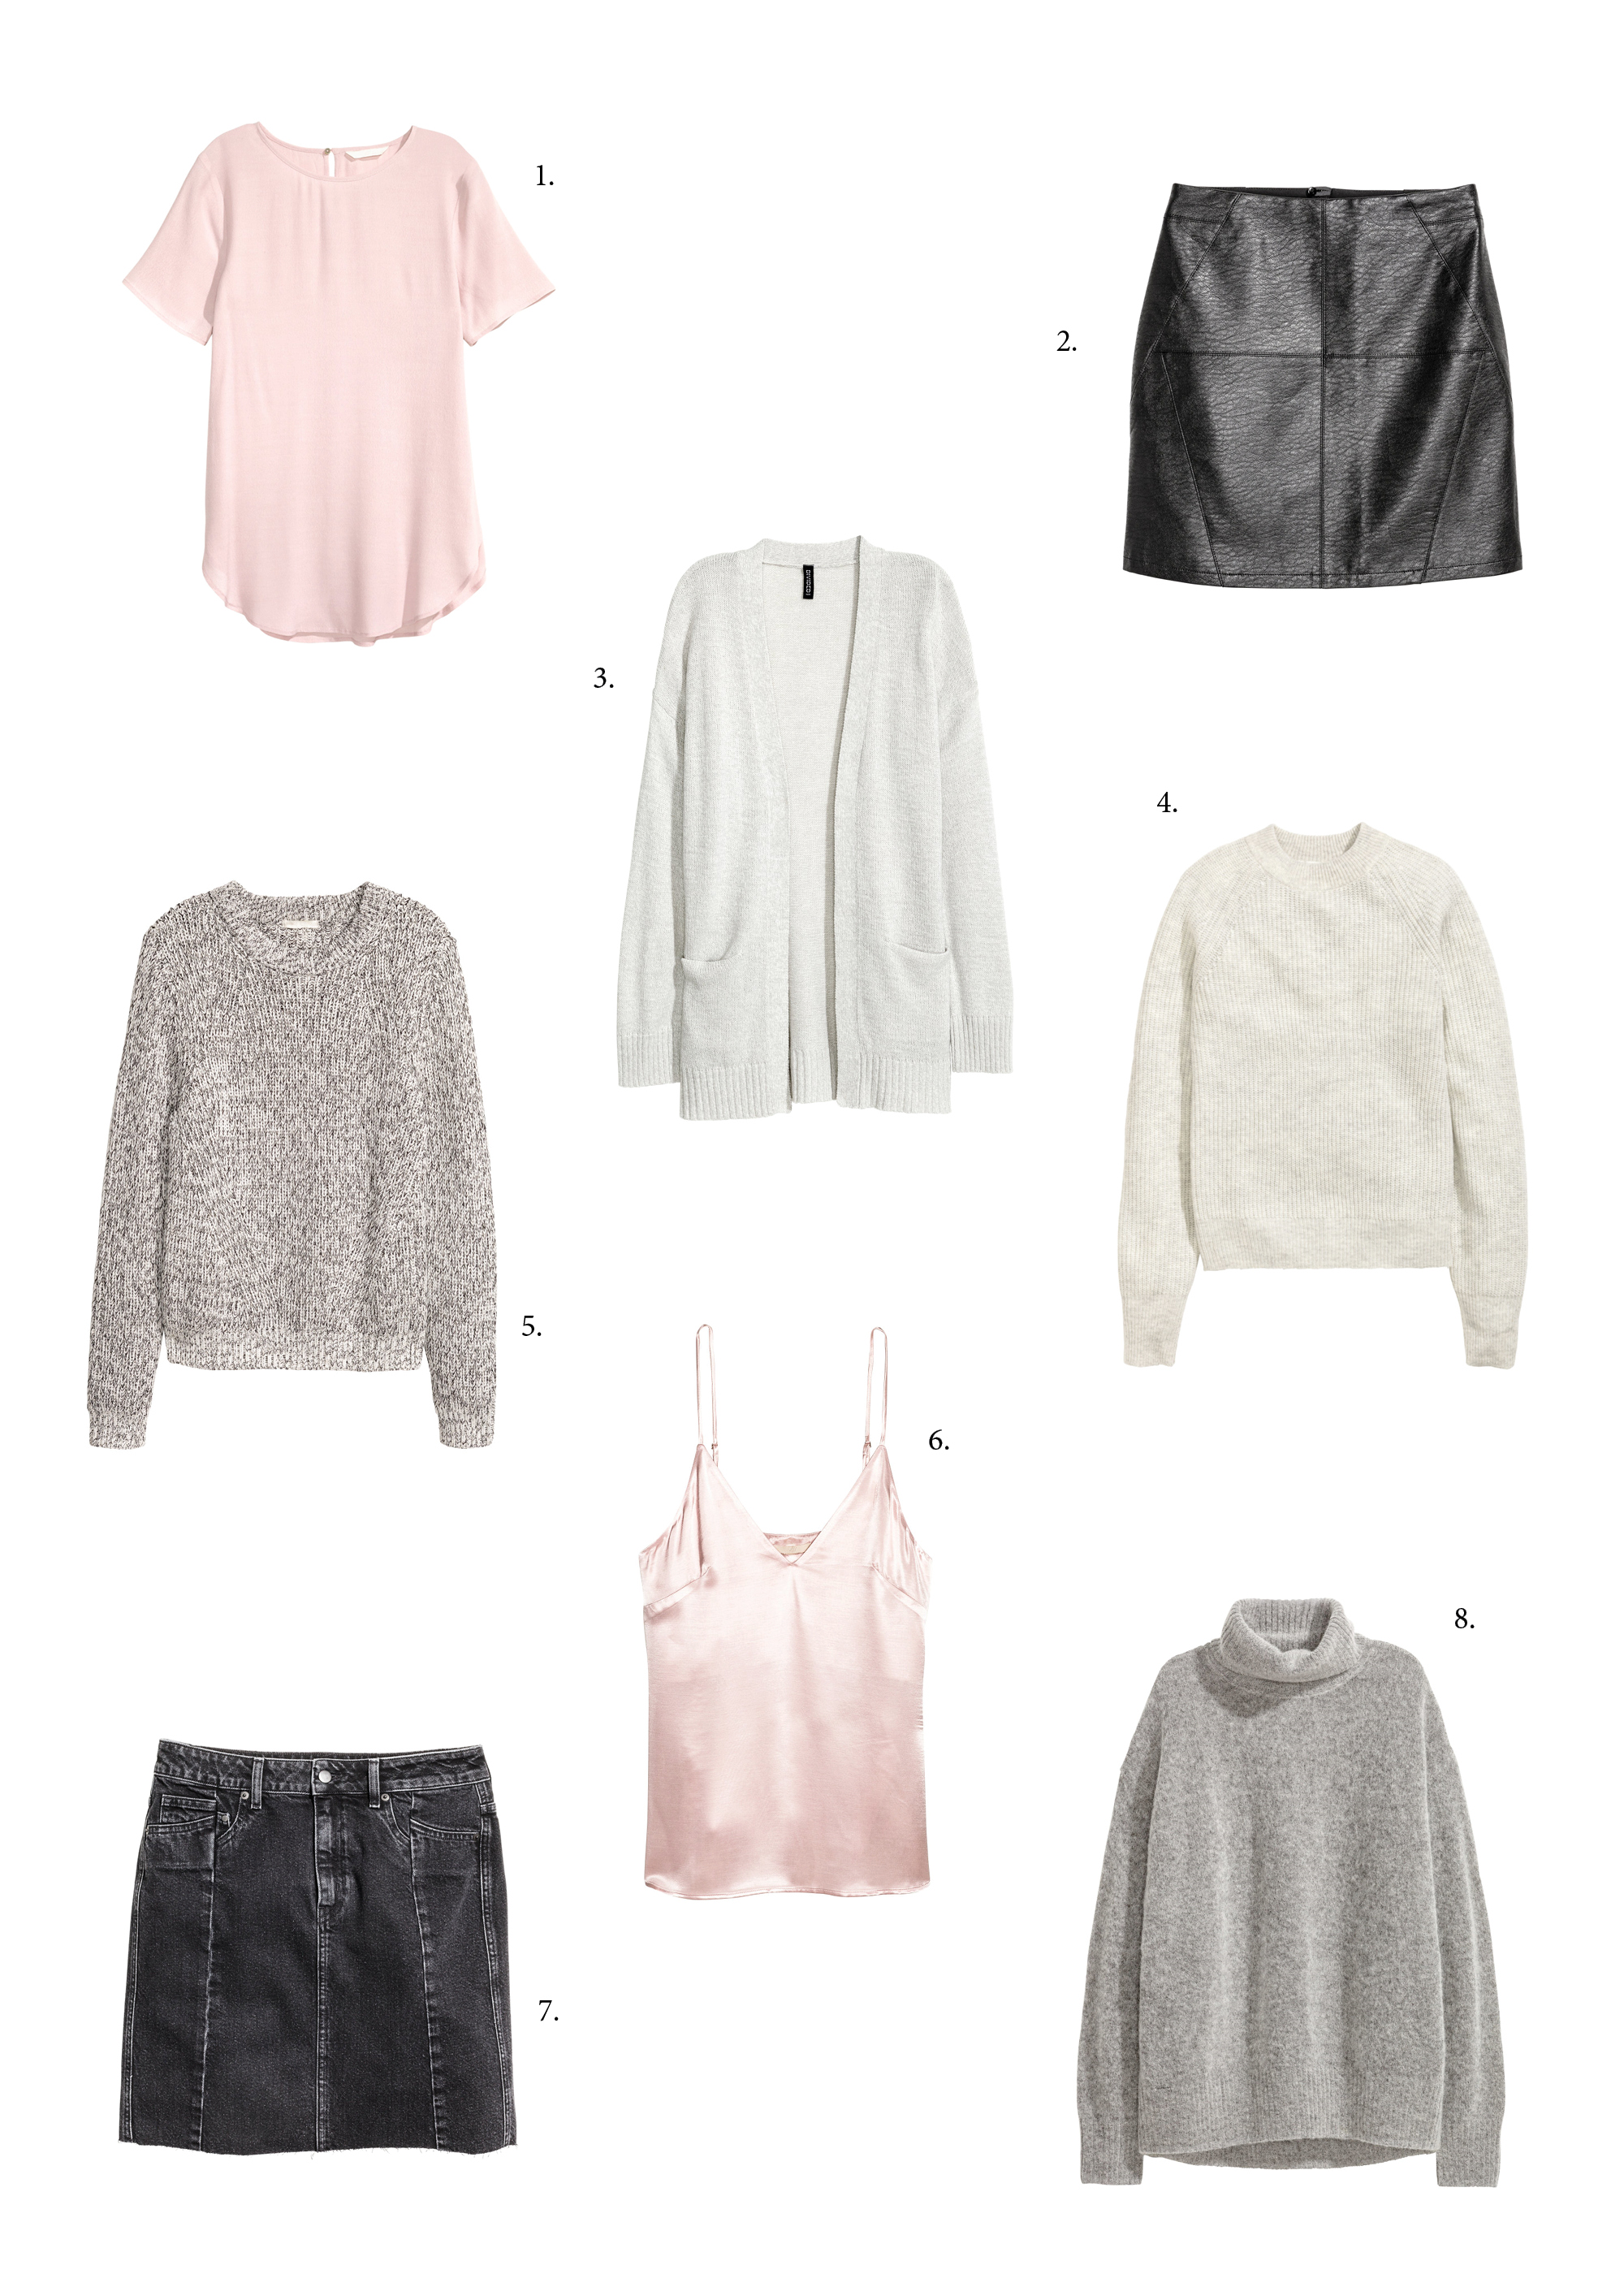 skirts-and-sweaters